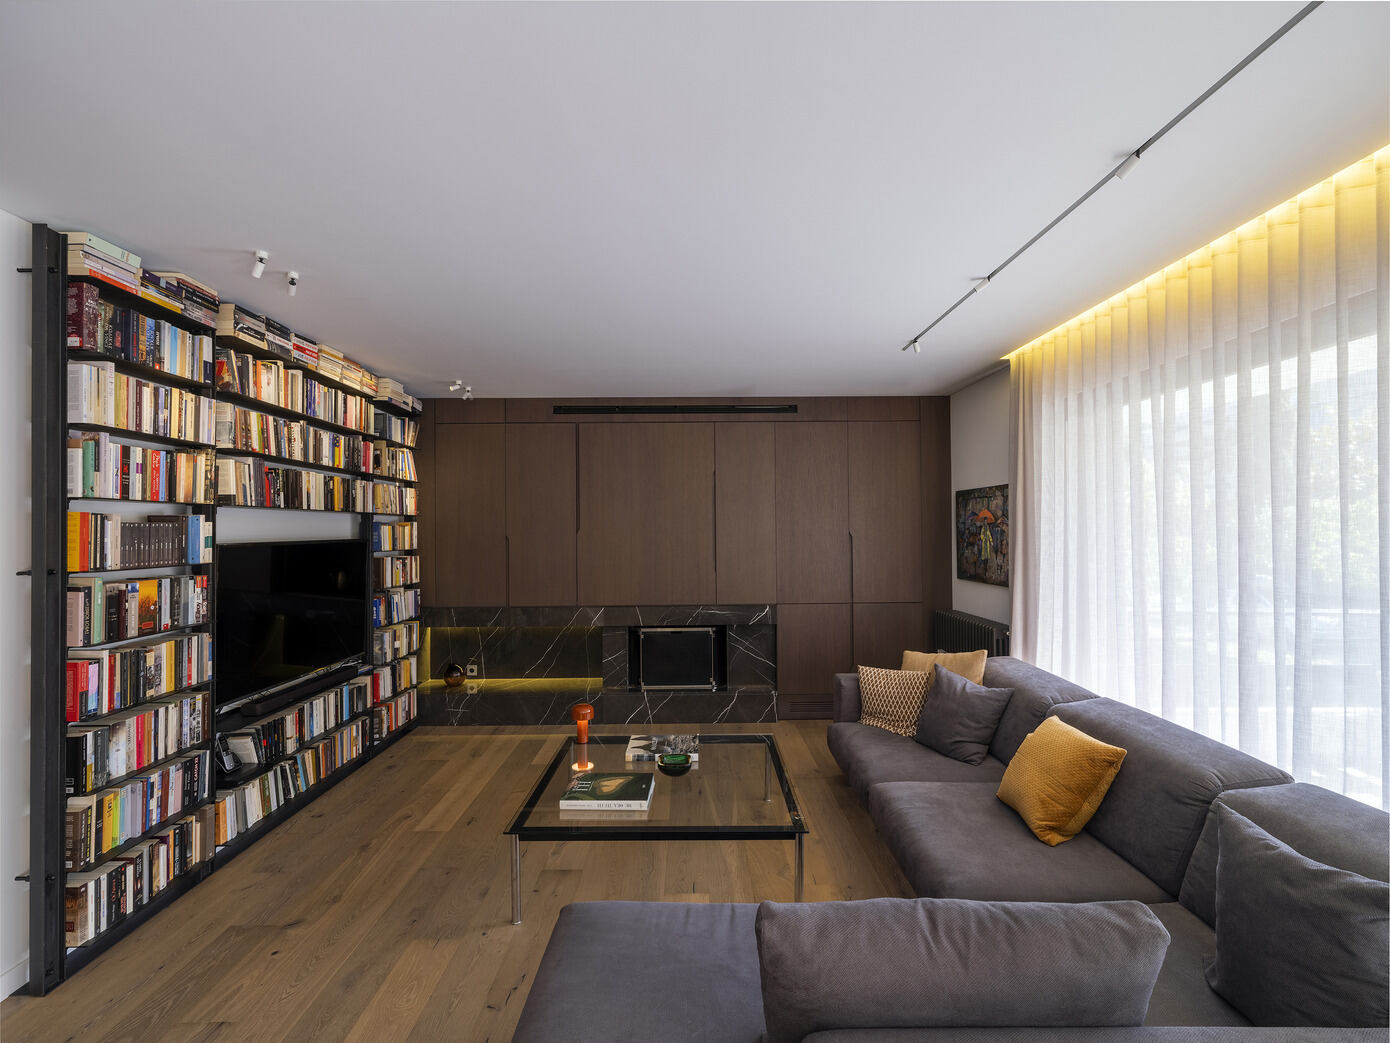 Apartment in Filothei by Barault Architects